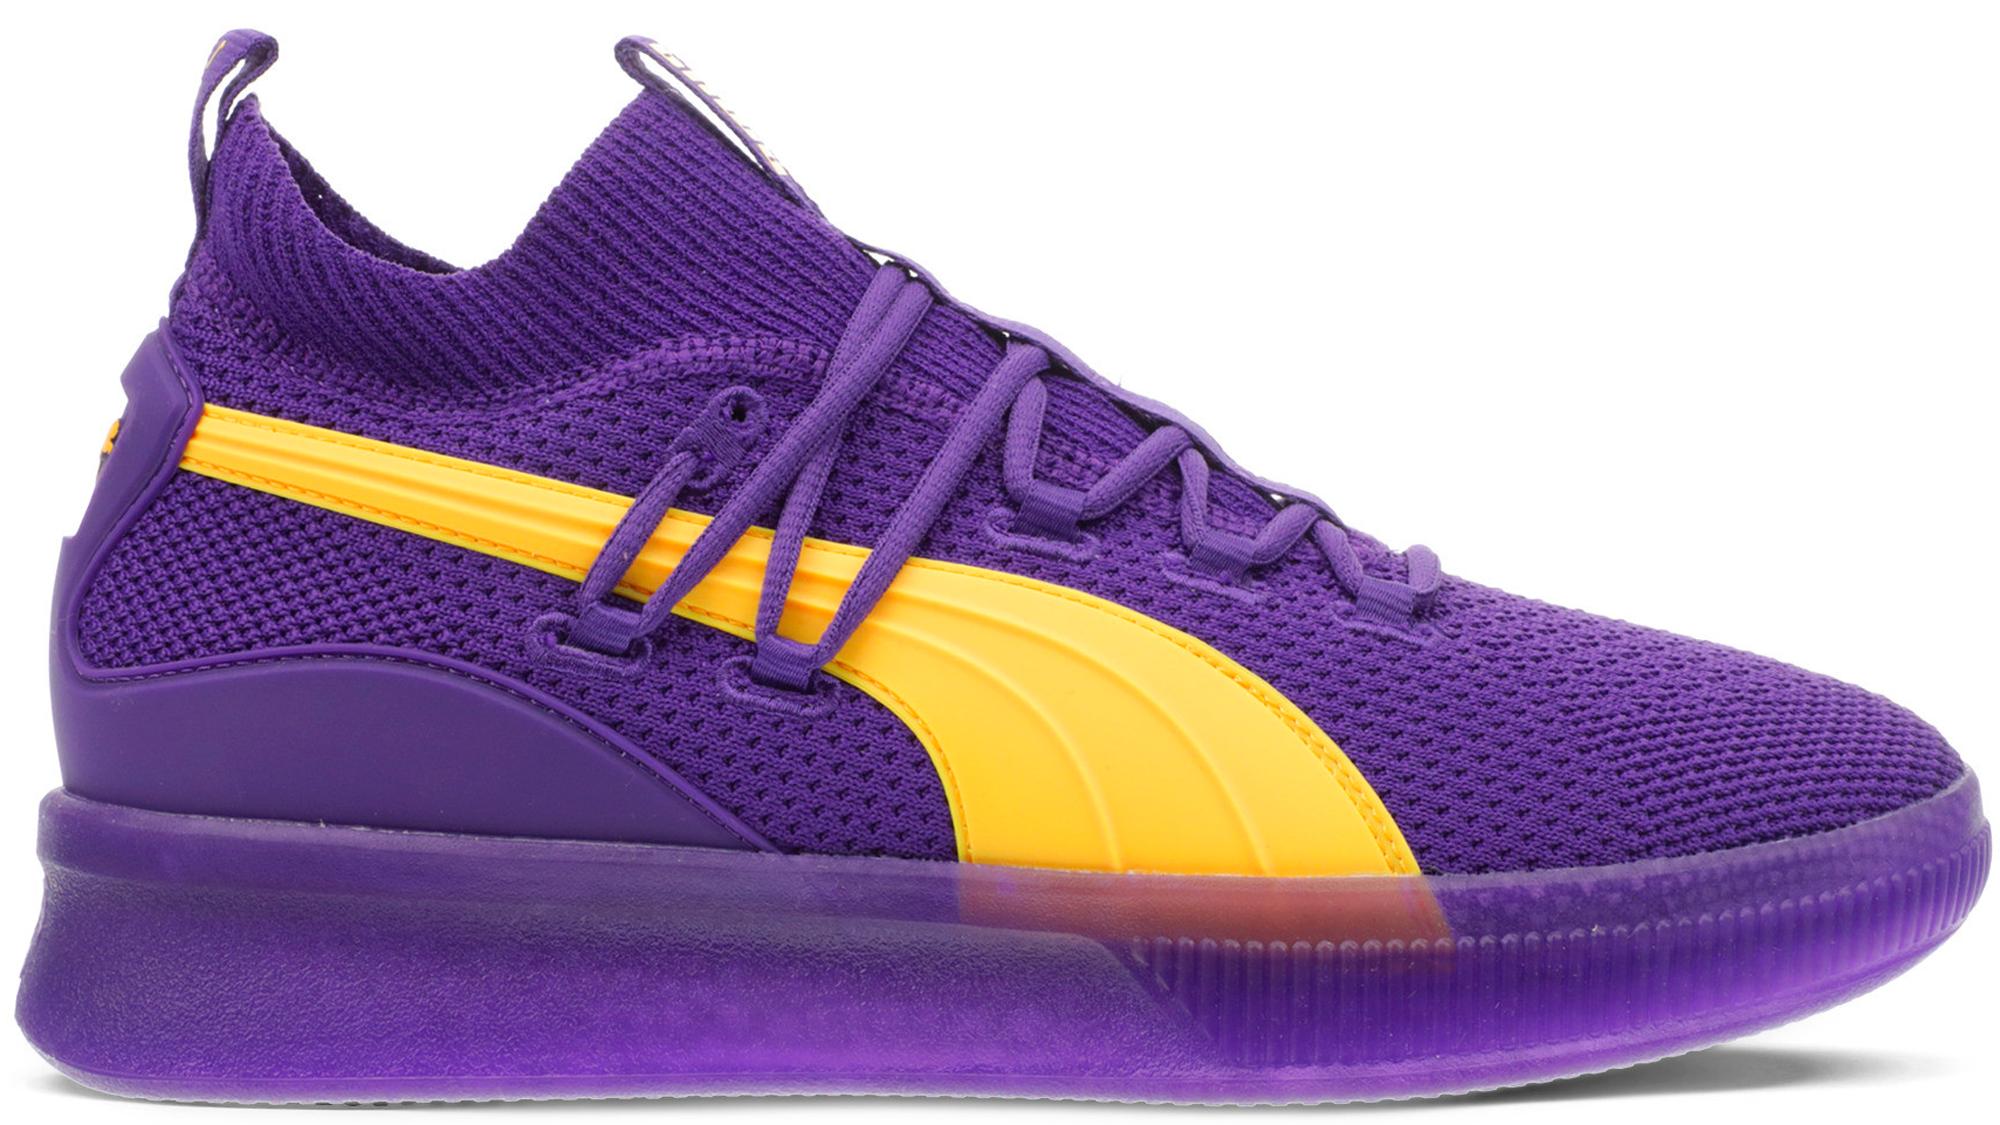 PUMA Rubber Clyde Court Gw Shoes in 